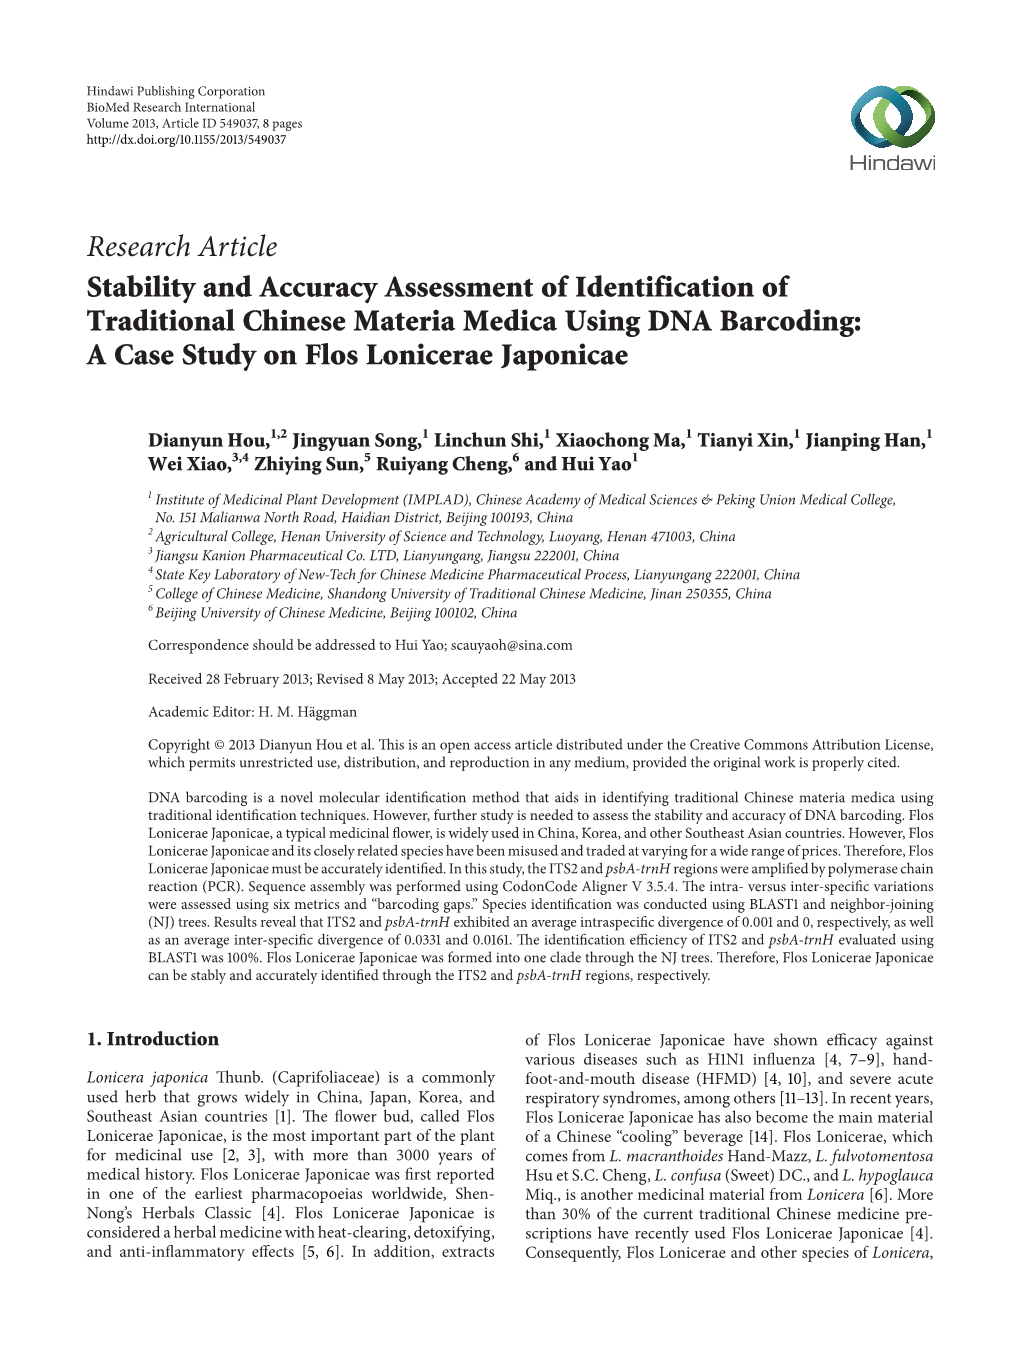 Stability and Accuracy Assessment of Identification of Traditional Chinese Materia Medica Using DNA Barcoding: a Case Study on Flos Lonicerae Japonicae